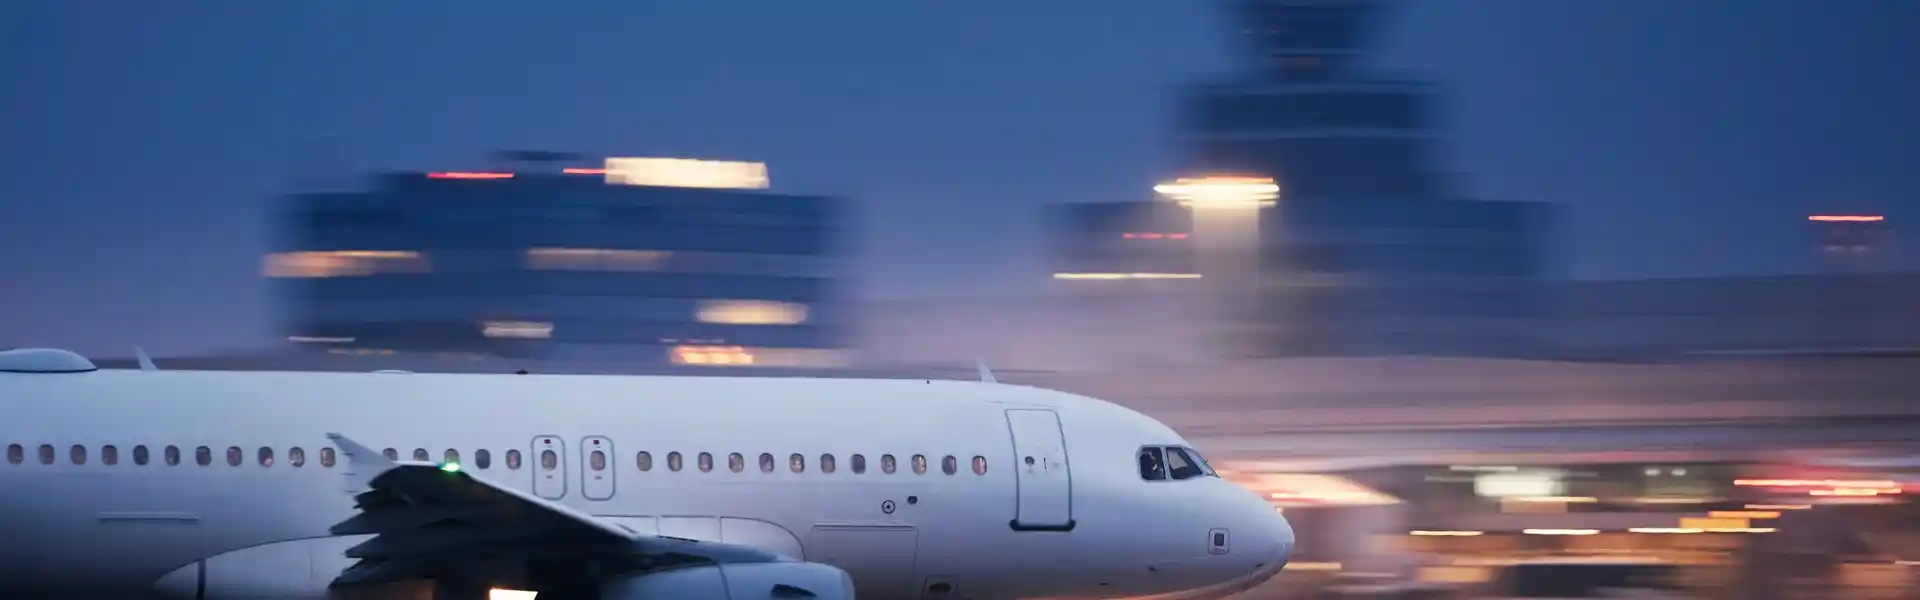 airplane-during-take-off-on-airport-runway-at-night-against